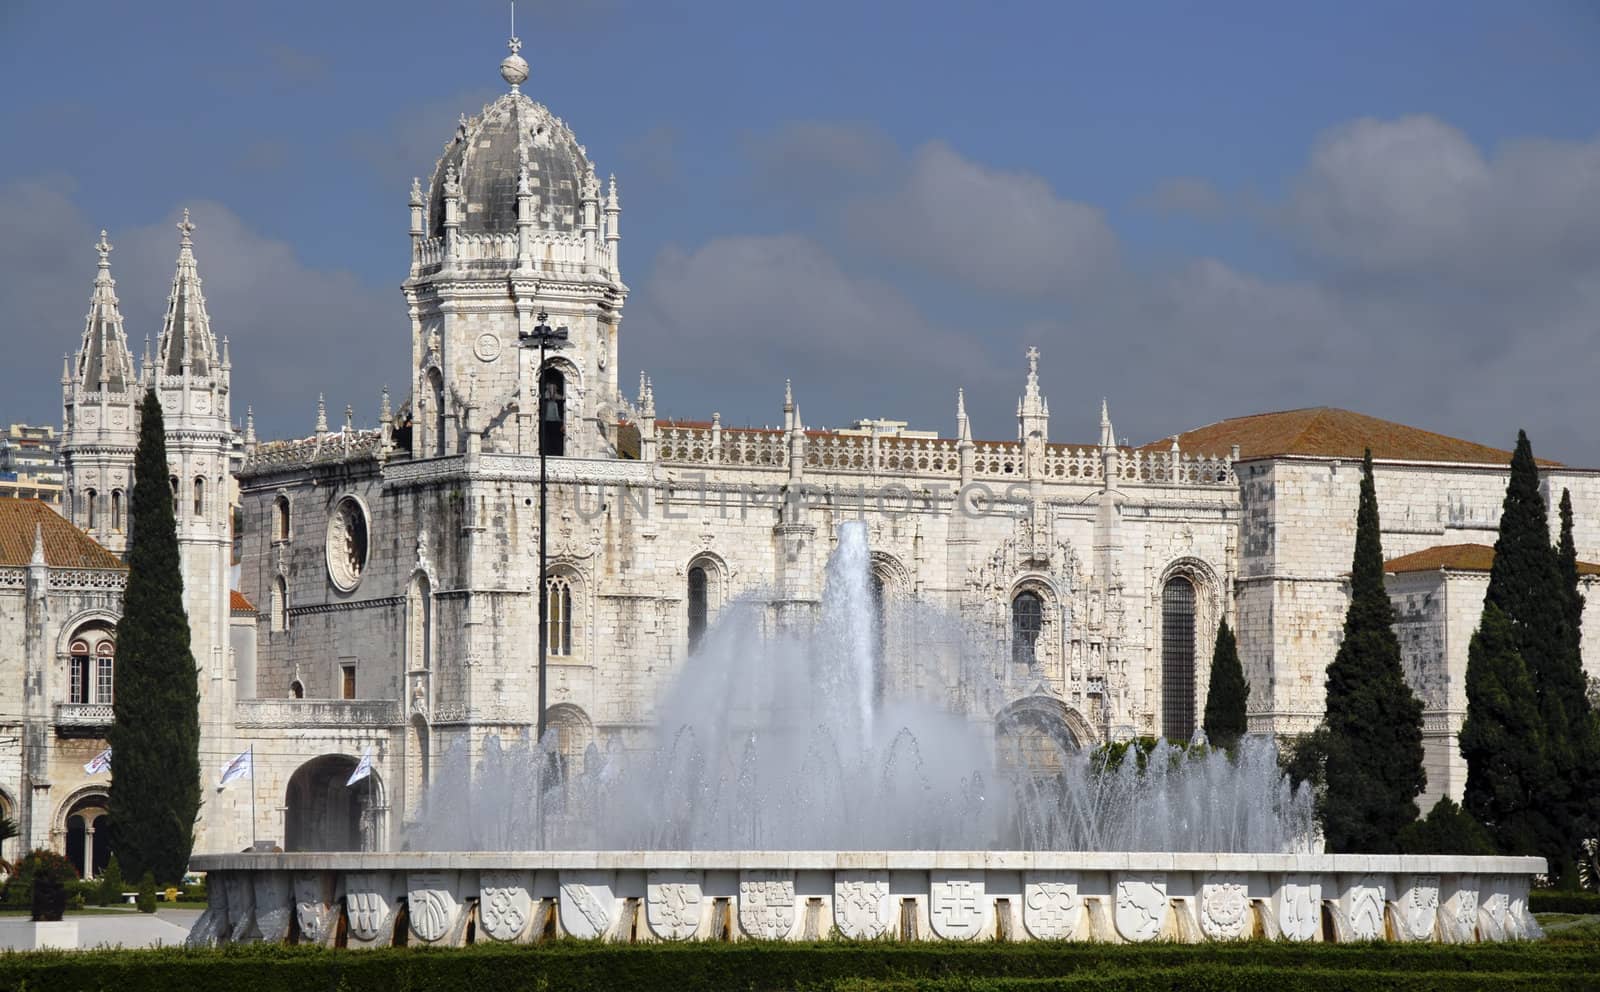 A classic European Monastery with a beautiful fountain in front of it